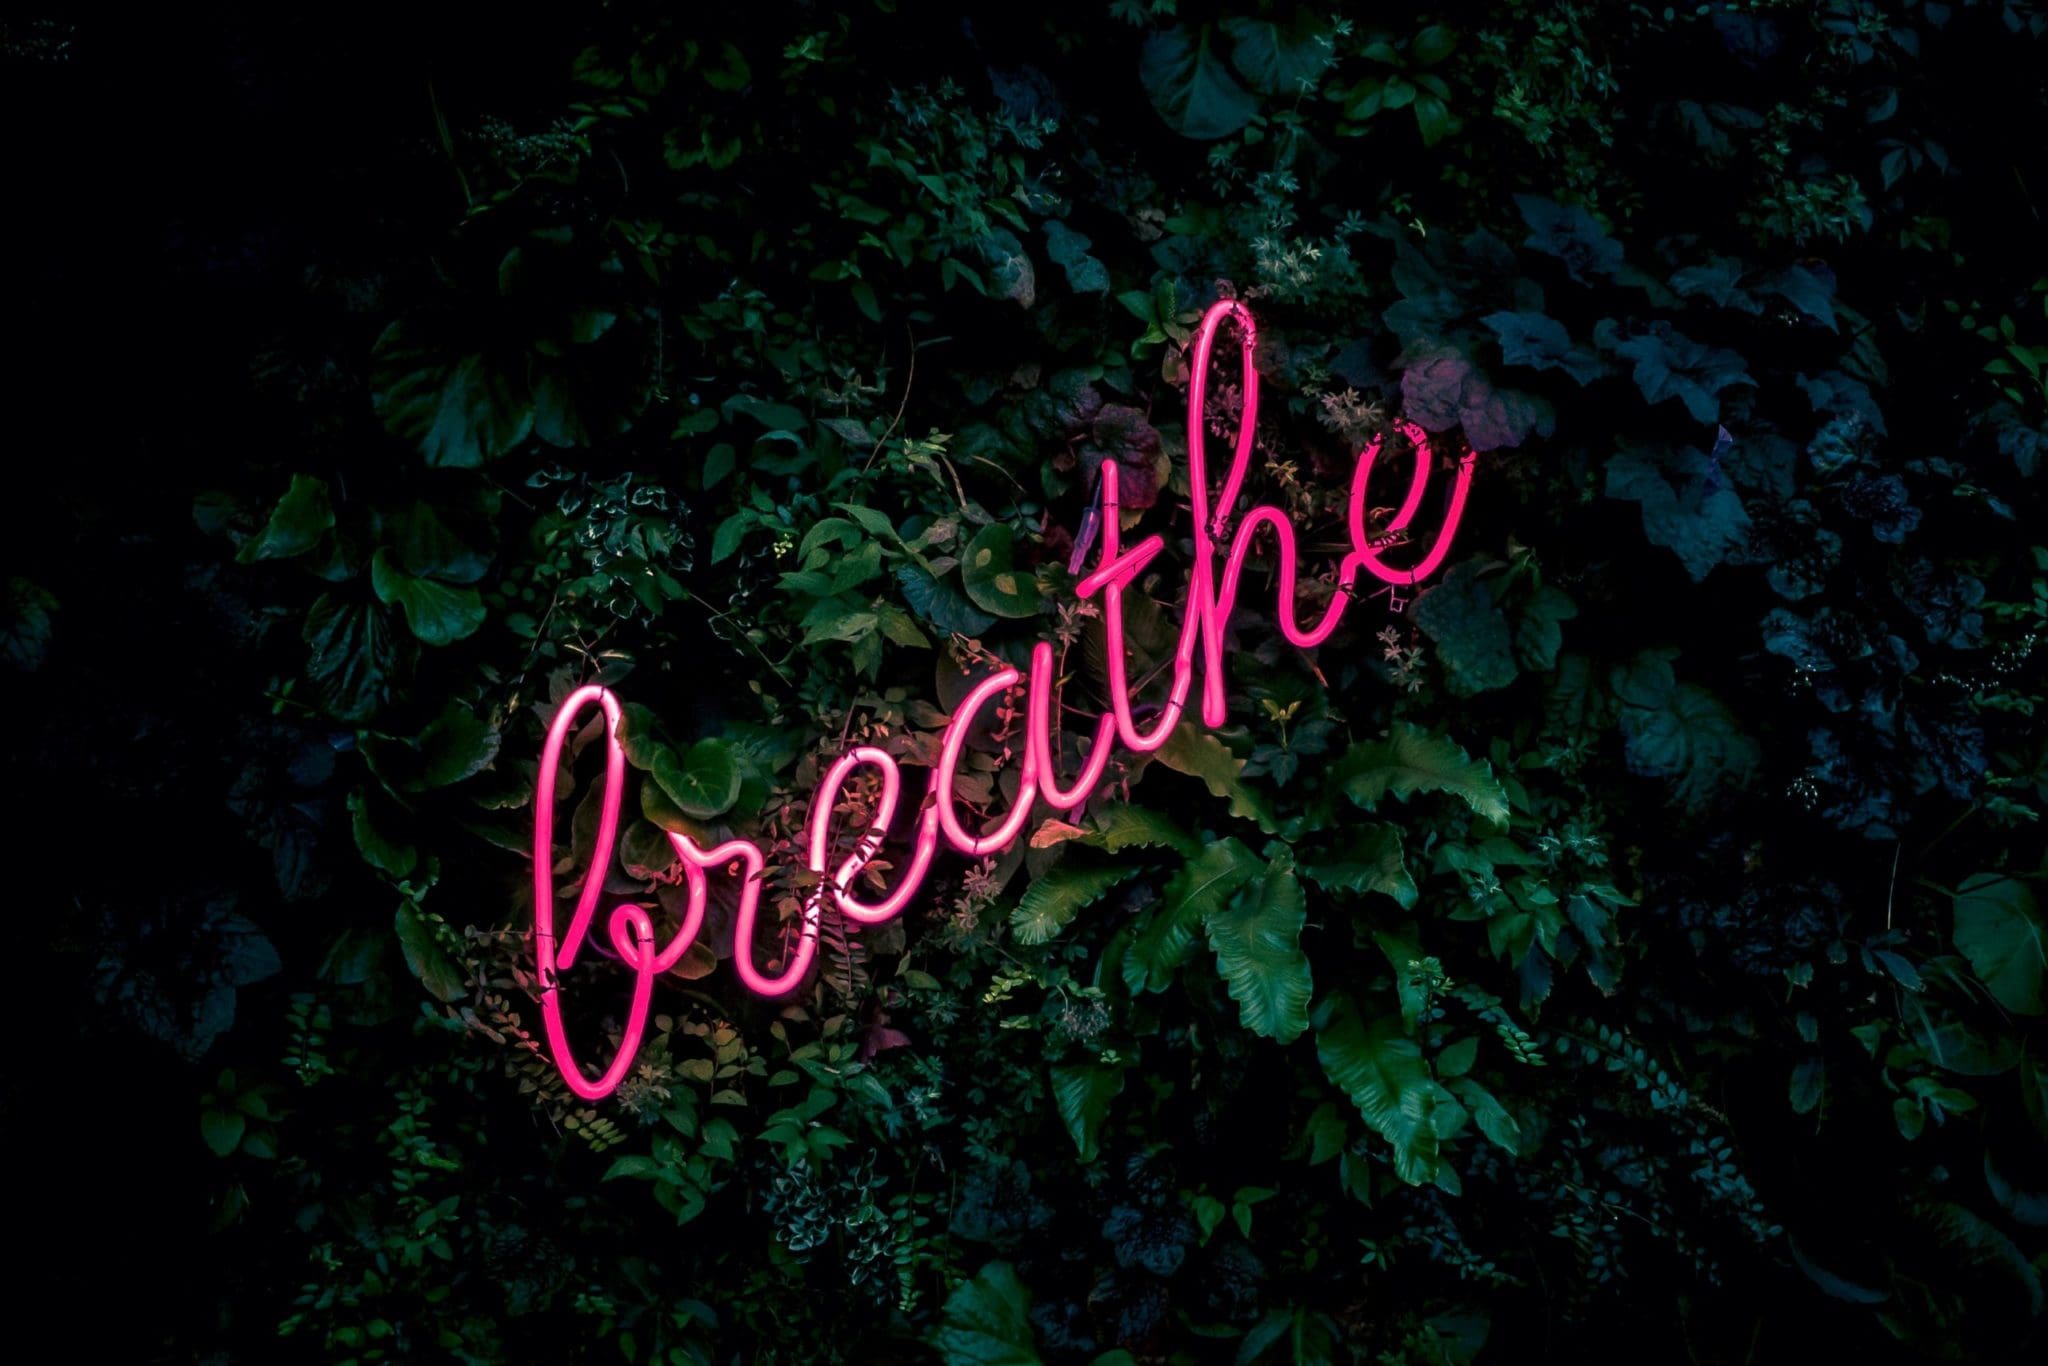 Stop. Breathe. Start where you are.